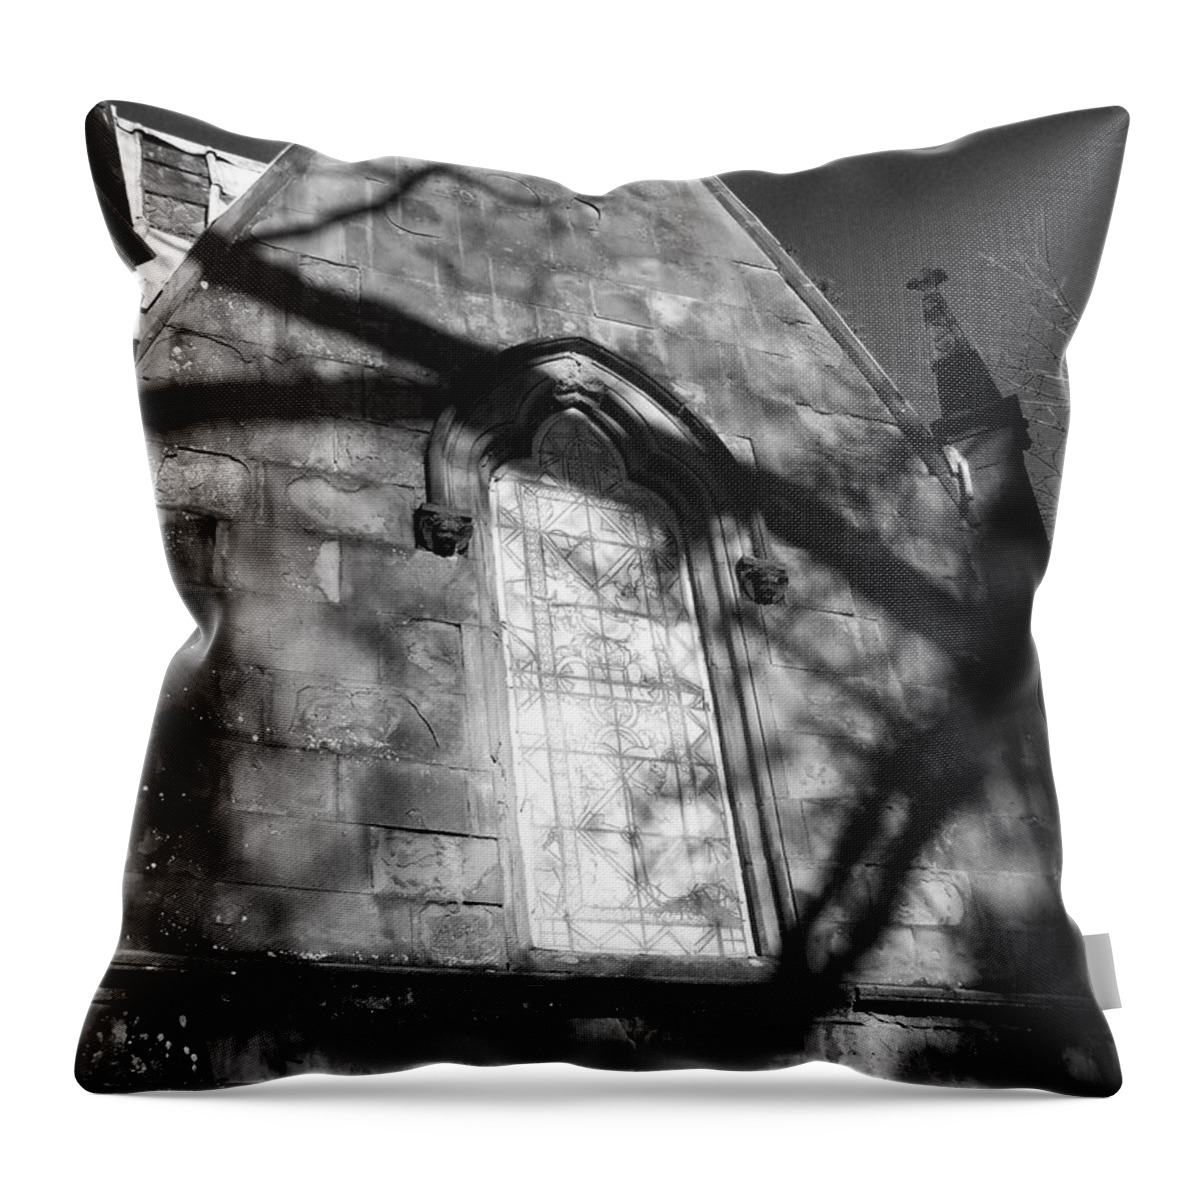 Mausoleum Throw Pillow featuring the photograph Up close by Heather L Wright